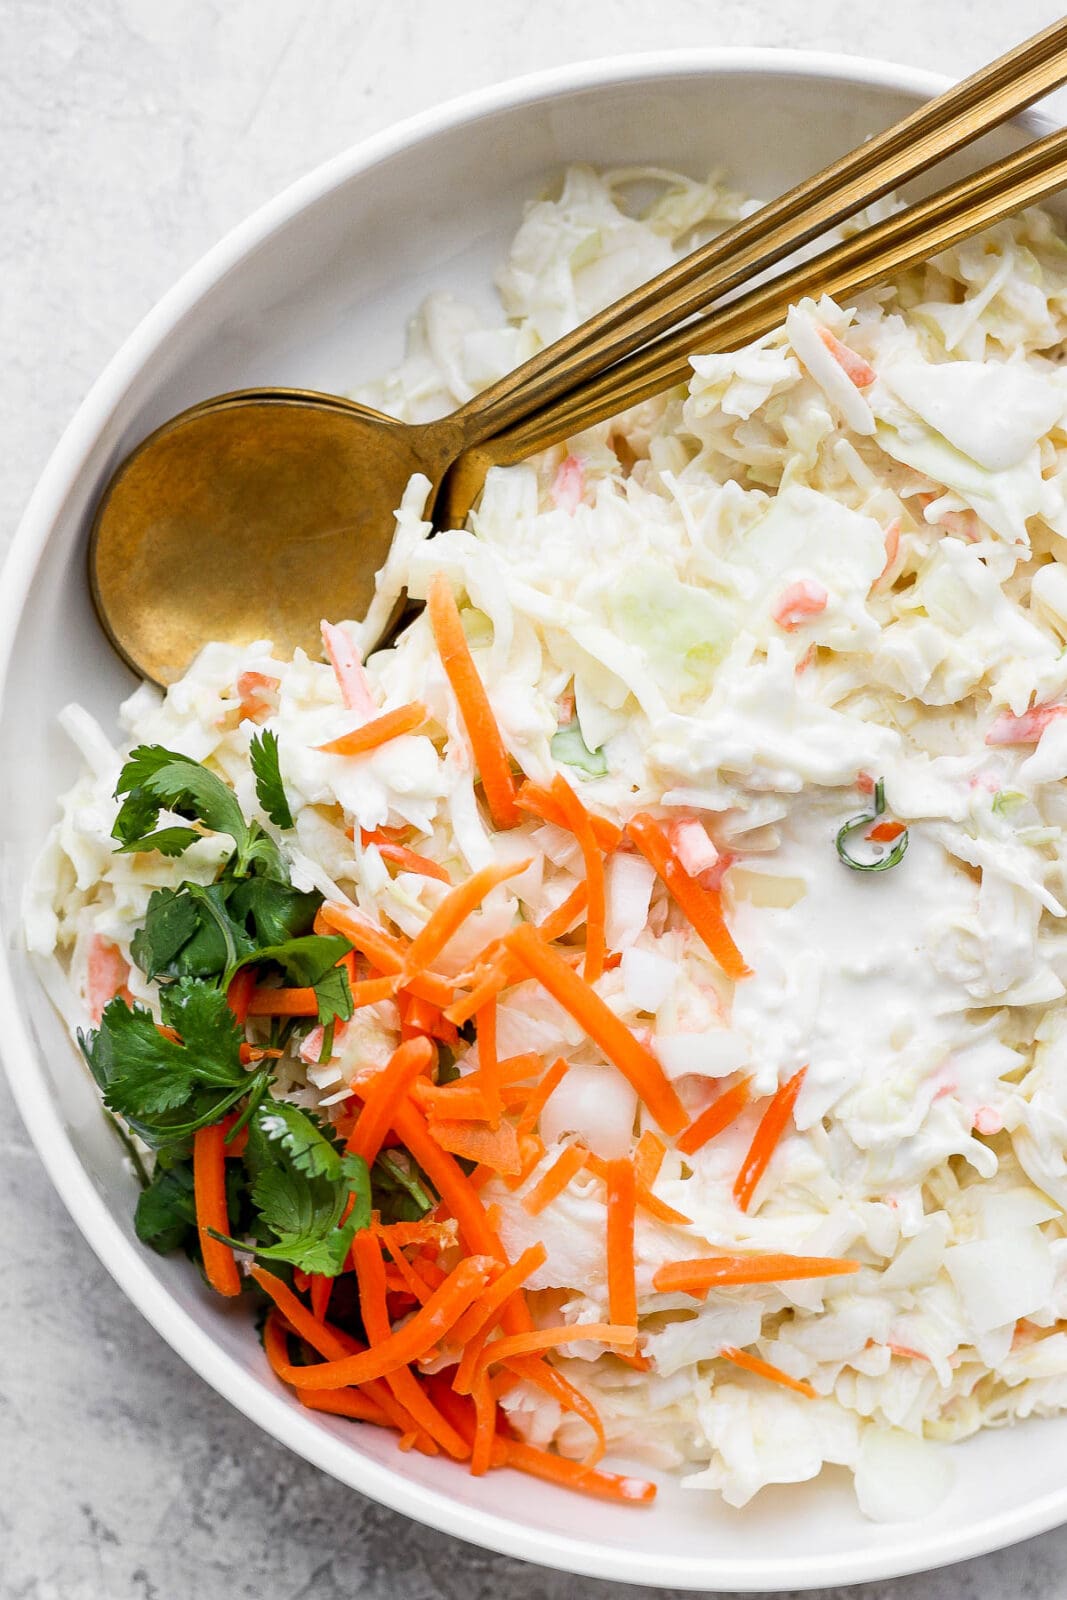 Creamy coleslaw in a bowl with spoons.